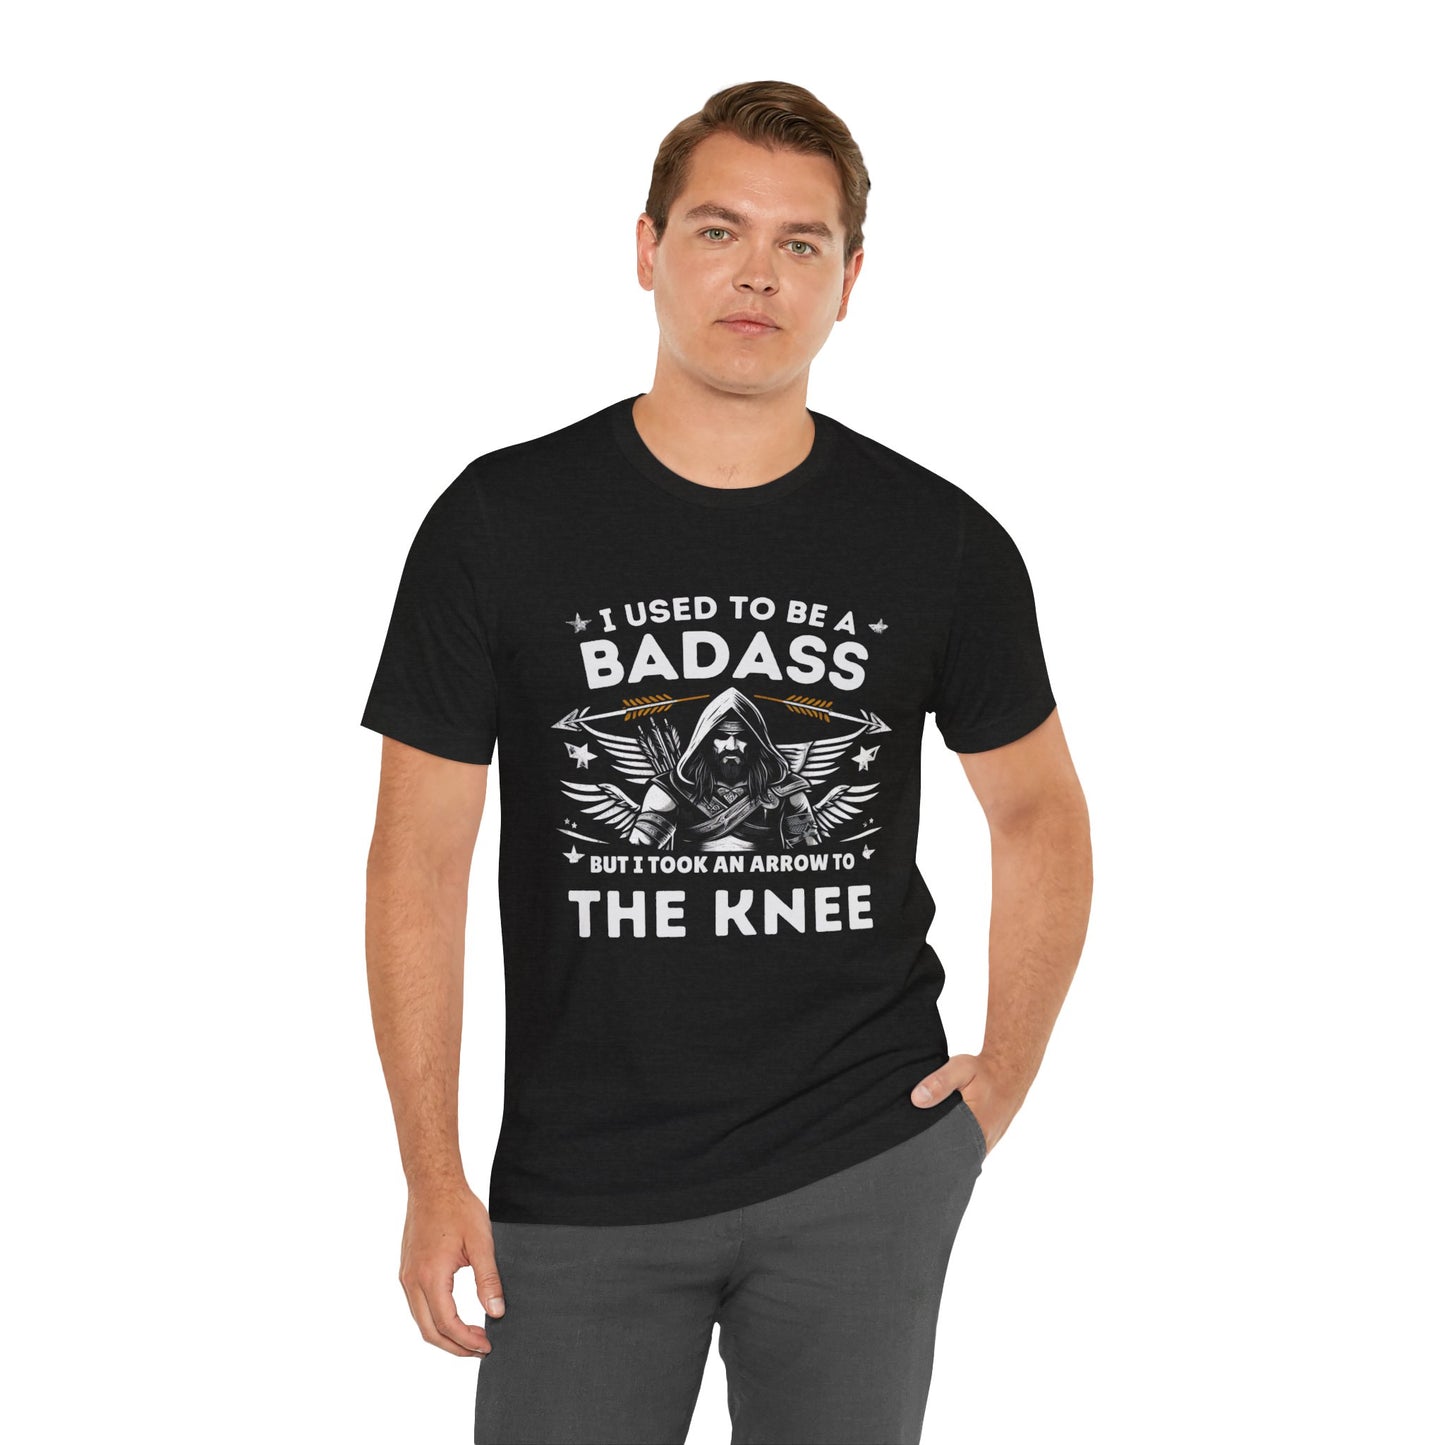 I Used to be a badass but I took an arrow to the Knee Tee Shirt |  Funny Unisex Short Sleeve Tee | Funny Gamer Shirt | Skyrim Style Gamer - CrazyTomTShirts